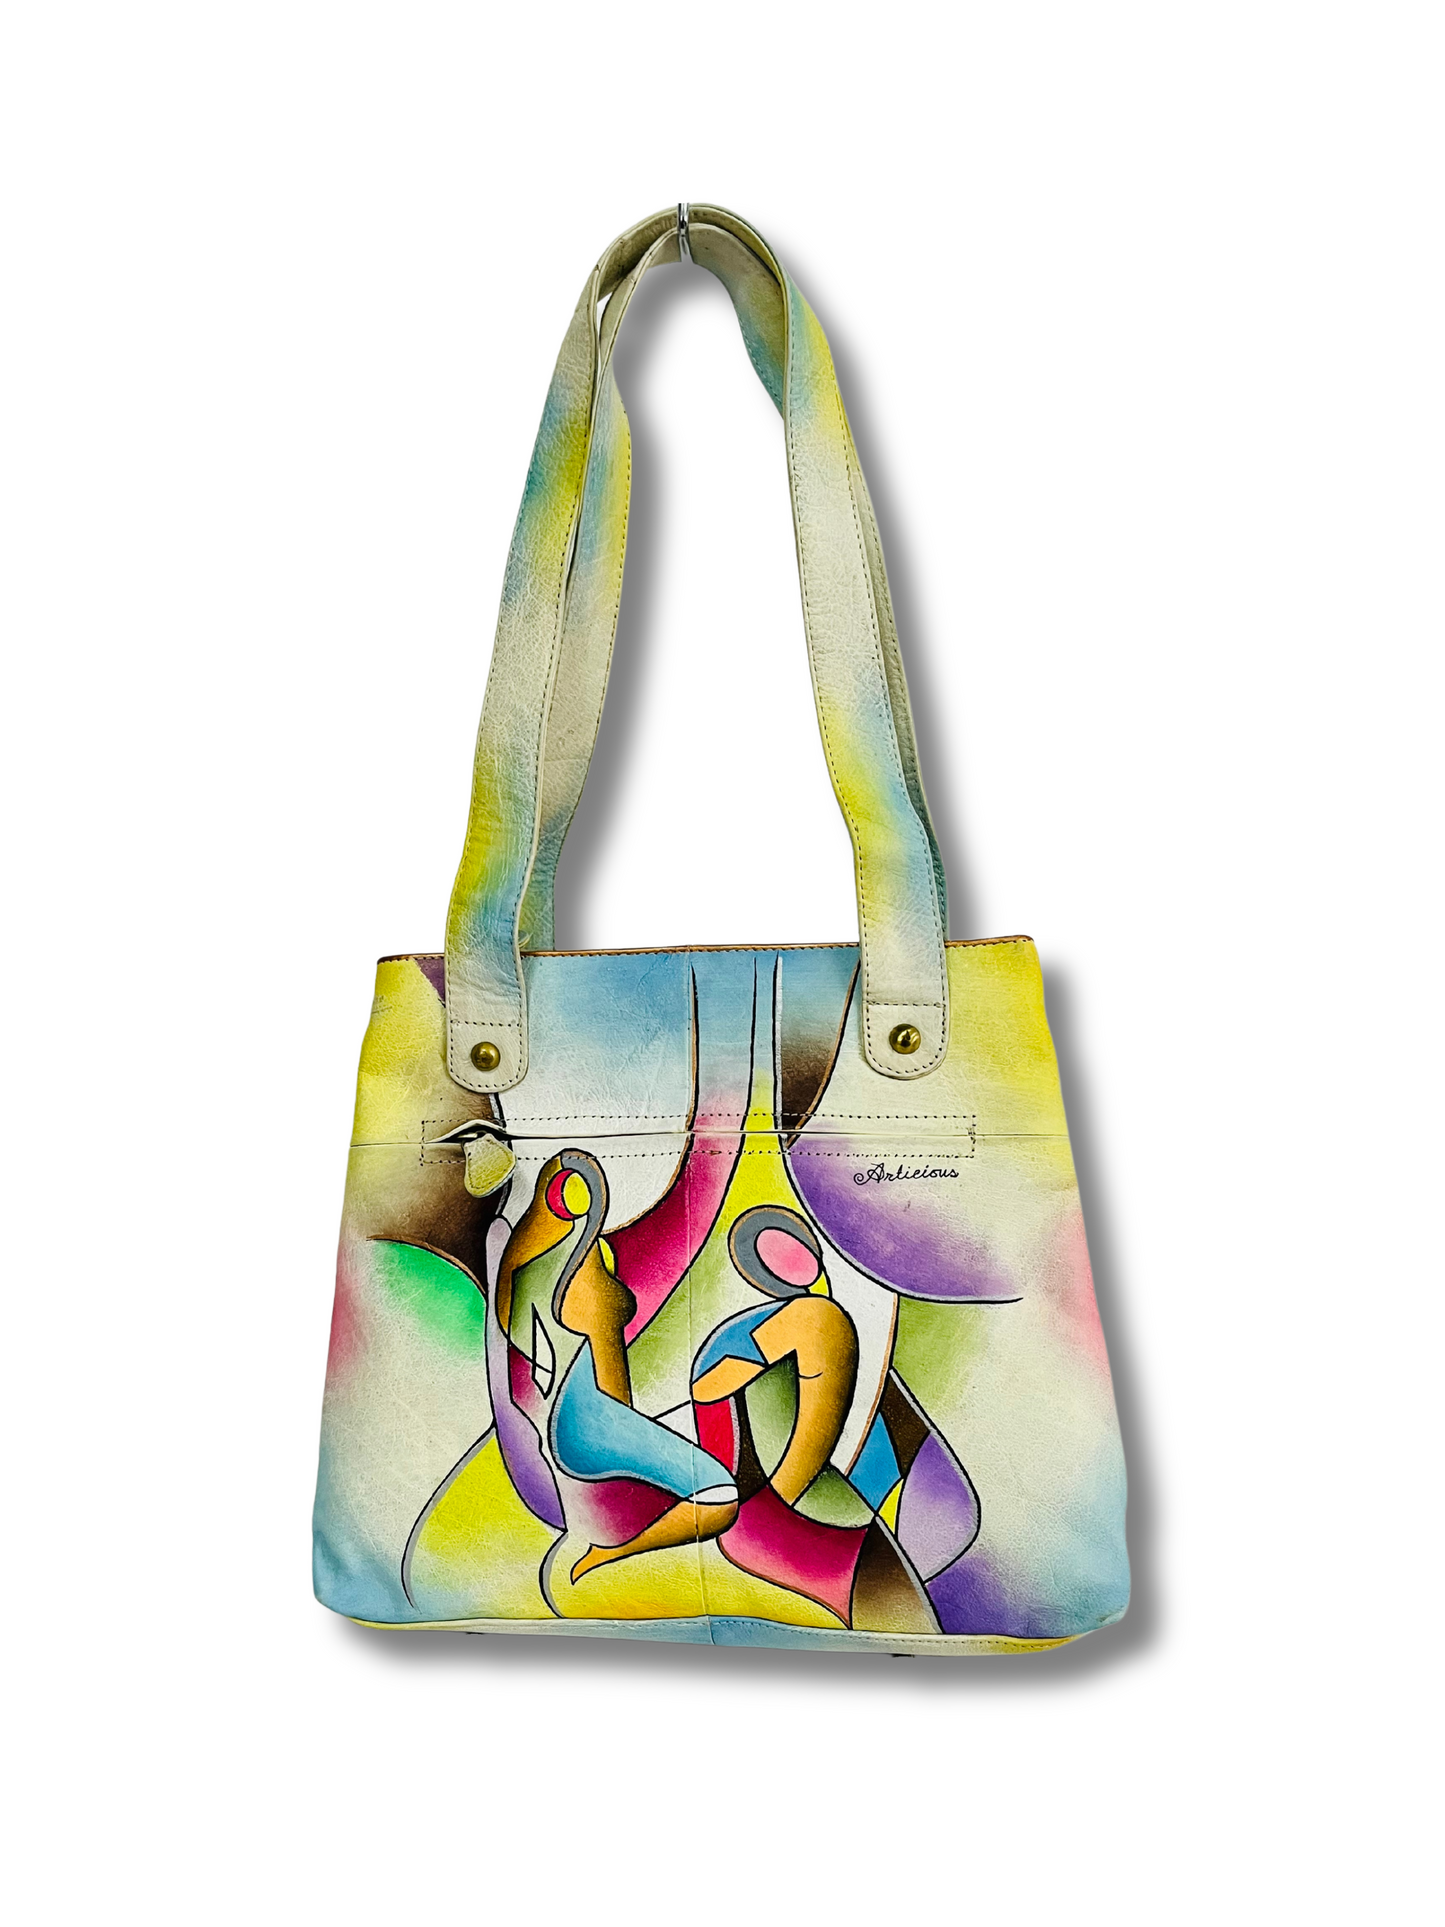 Affinity hand-painted leather bag